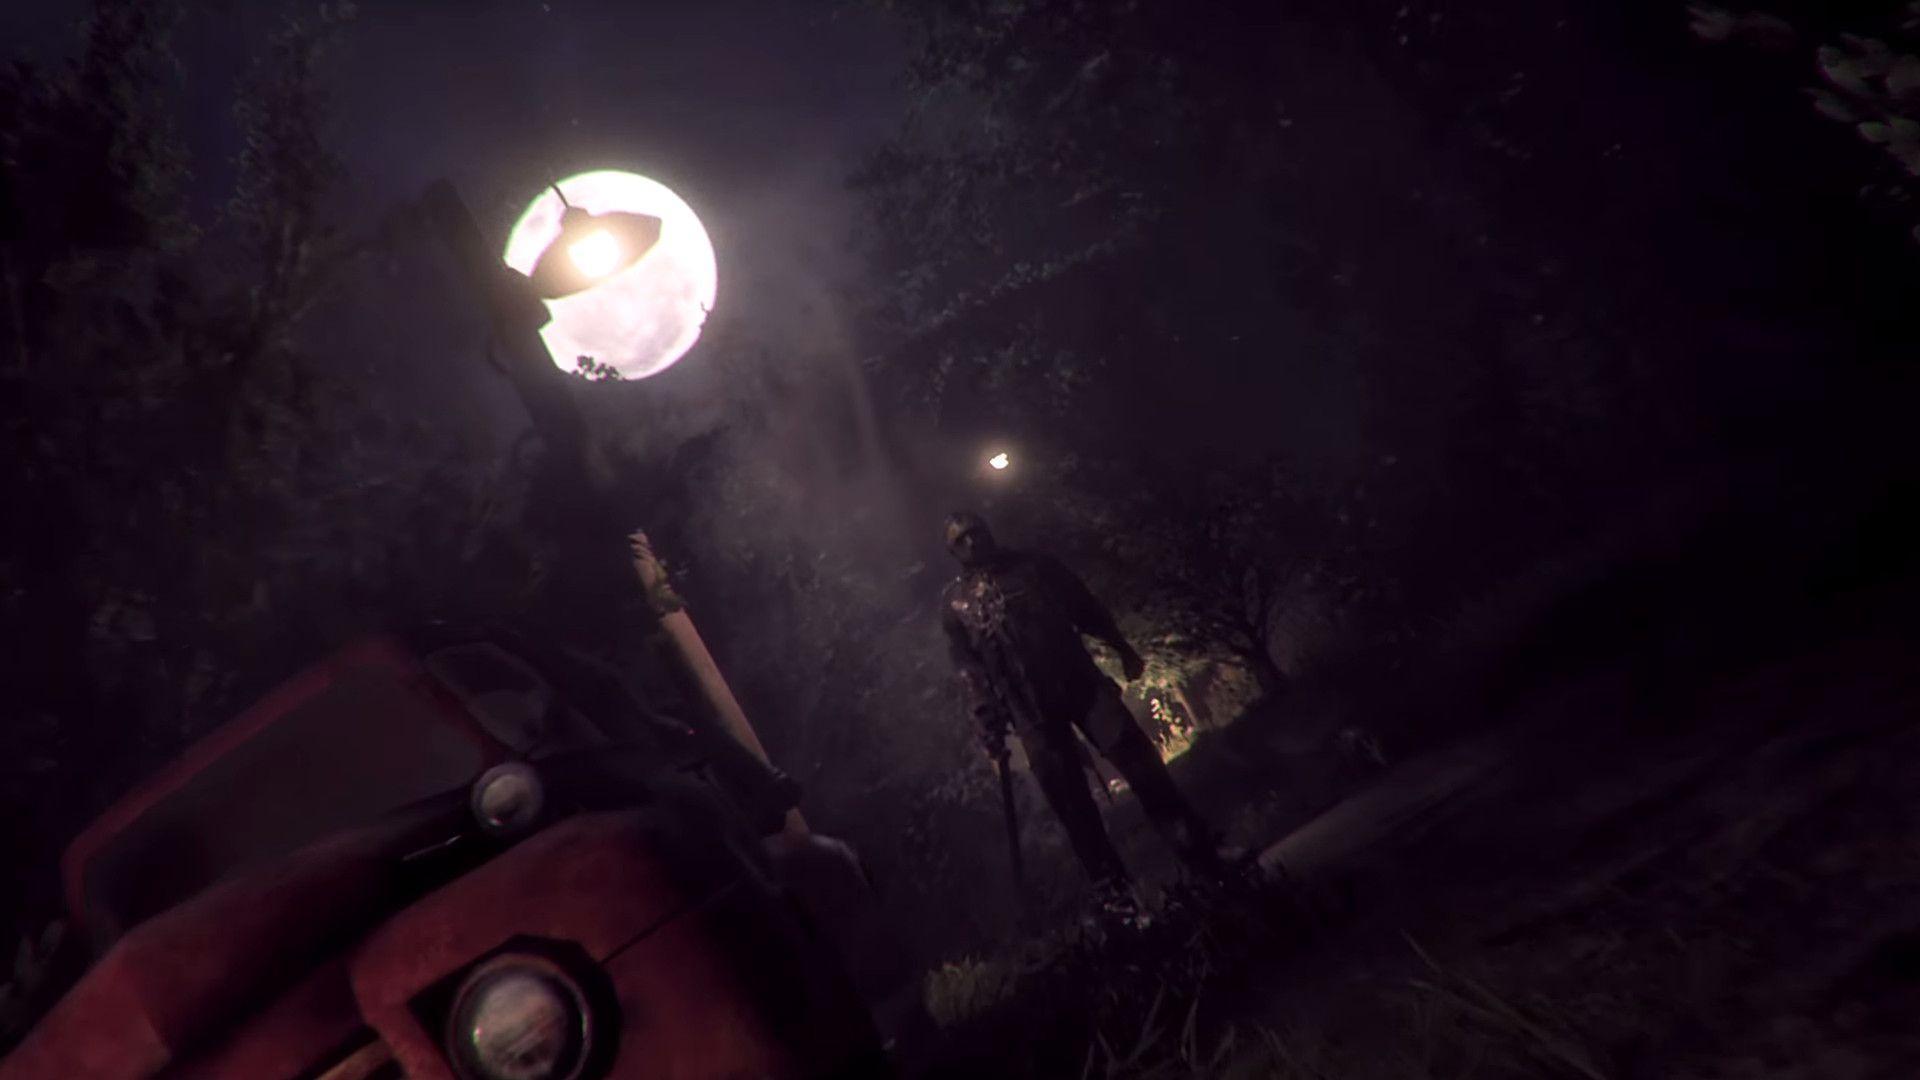 Friday the 13th: The Game Announced for PC, Xbox One and PS4